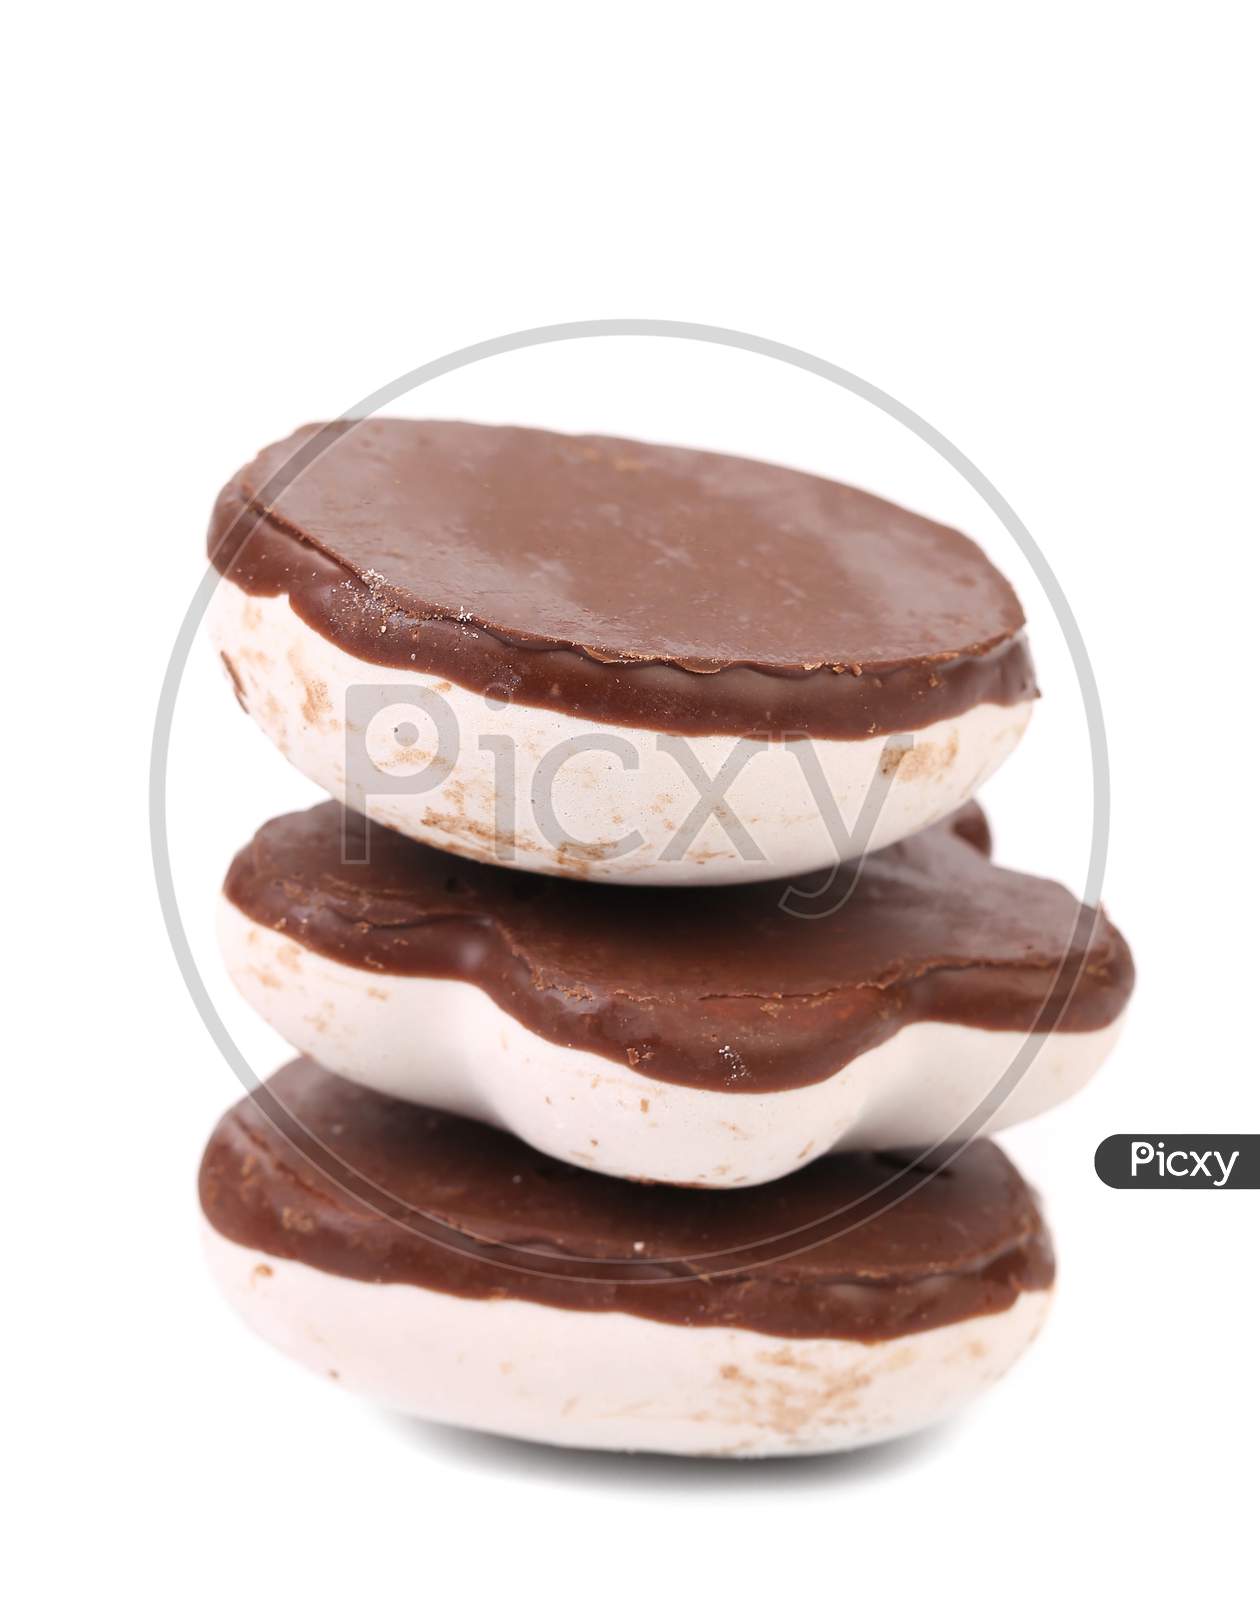 Stack Of White Kisses Cookies With Chocolate.  Isolated On White Background